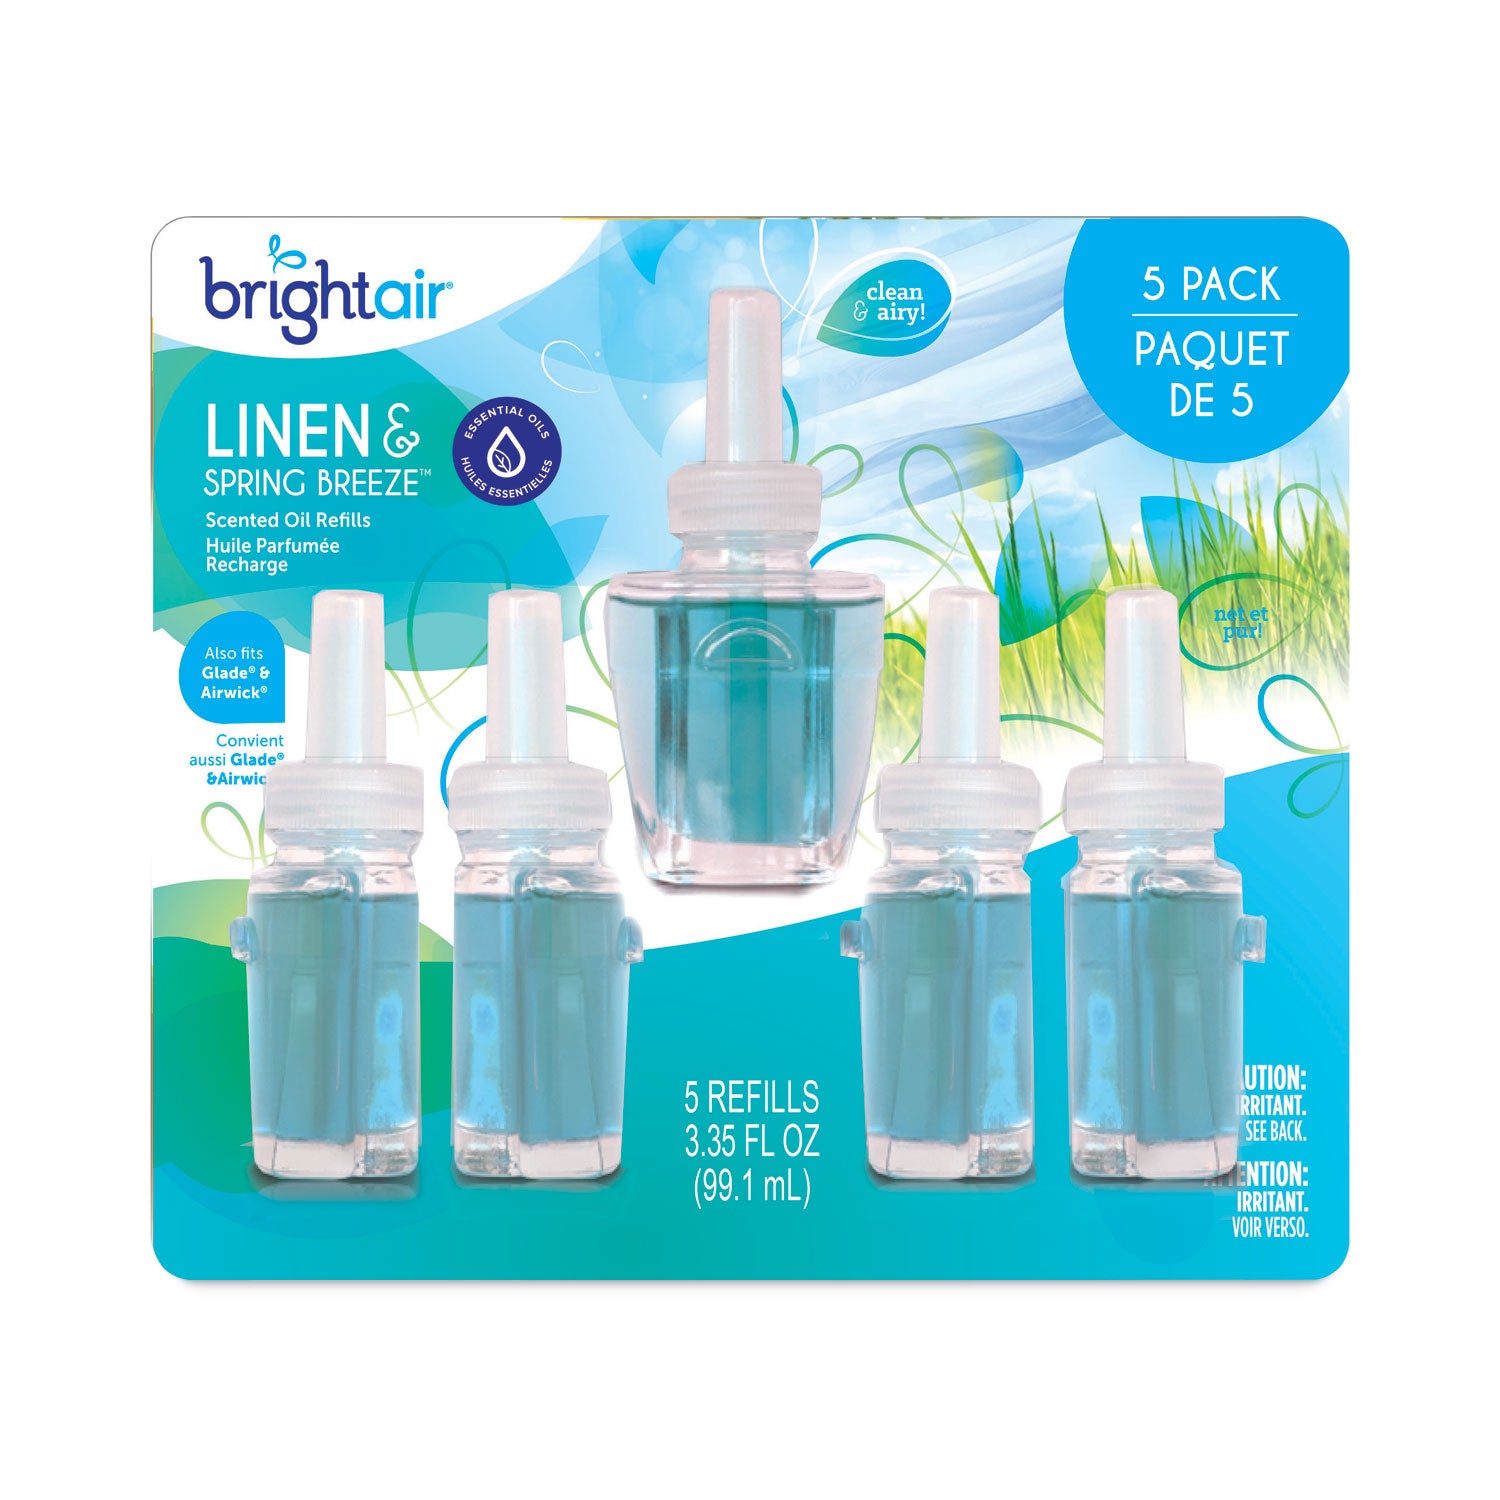 electric-scented-oil-air-freshener-refill-linen-and-spring-breeze-067-oz-bottle-5-pack-6-pack-carton_bri900669ct - 1